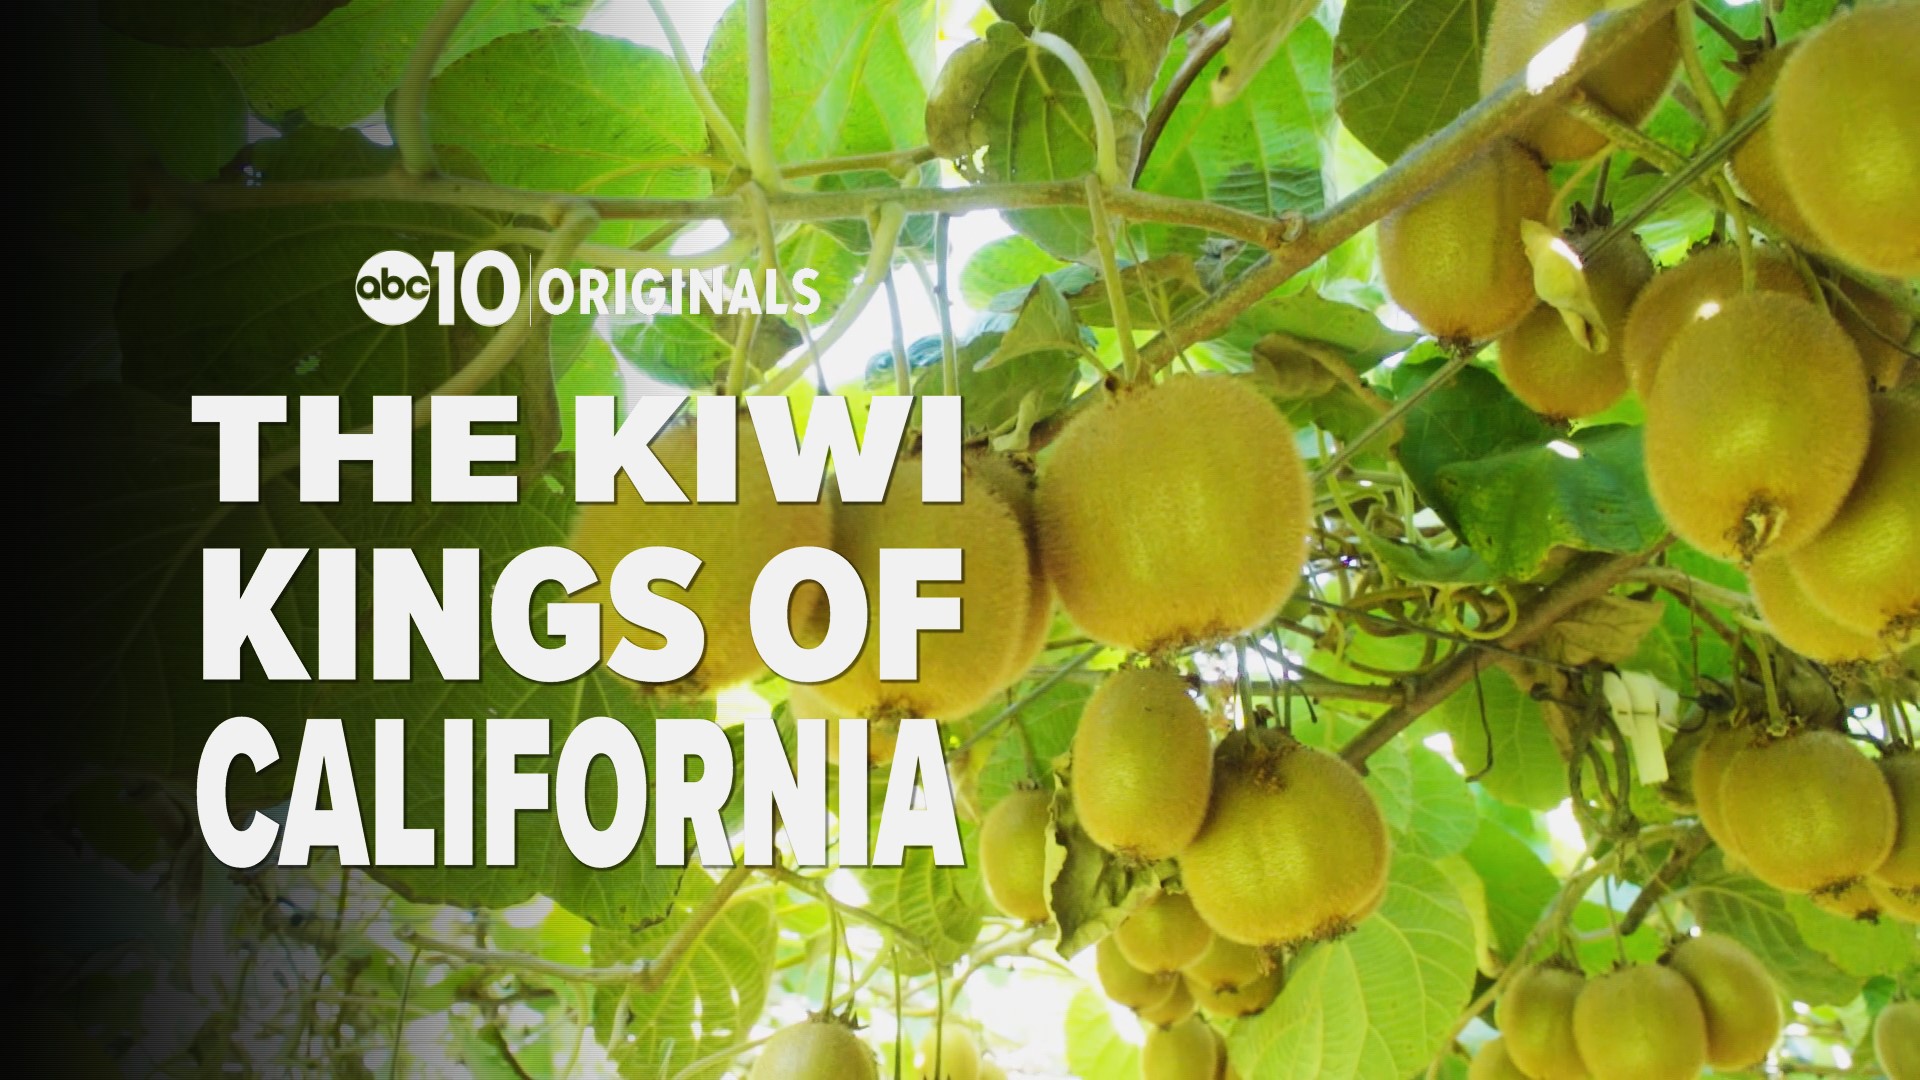 If you buy kiwi fruit at Whole Foods, they probably came from Marysville. John Bartell visits the largest organic kiwi farm in California, just in time for the harvest.